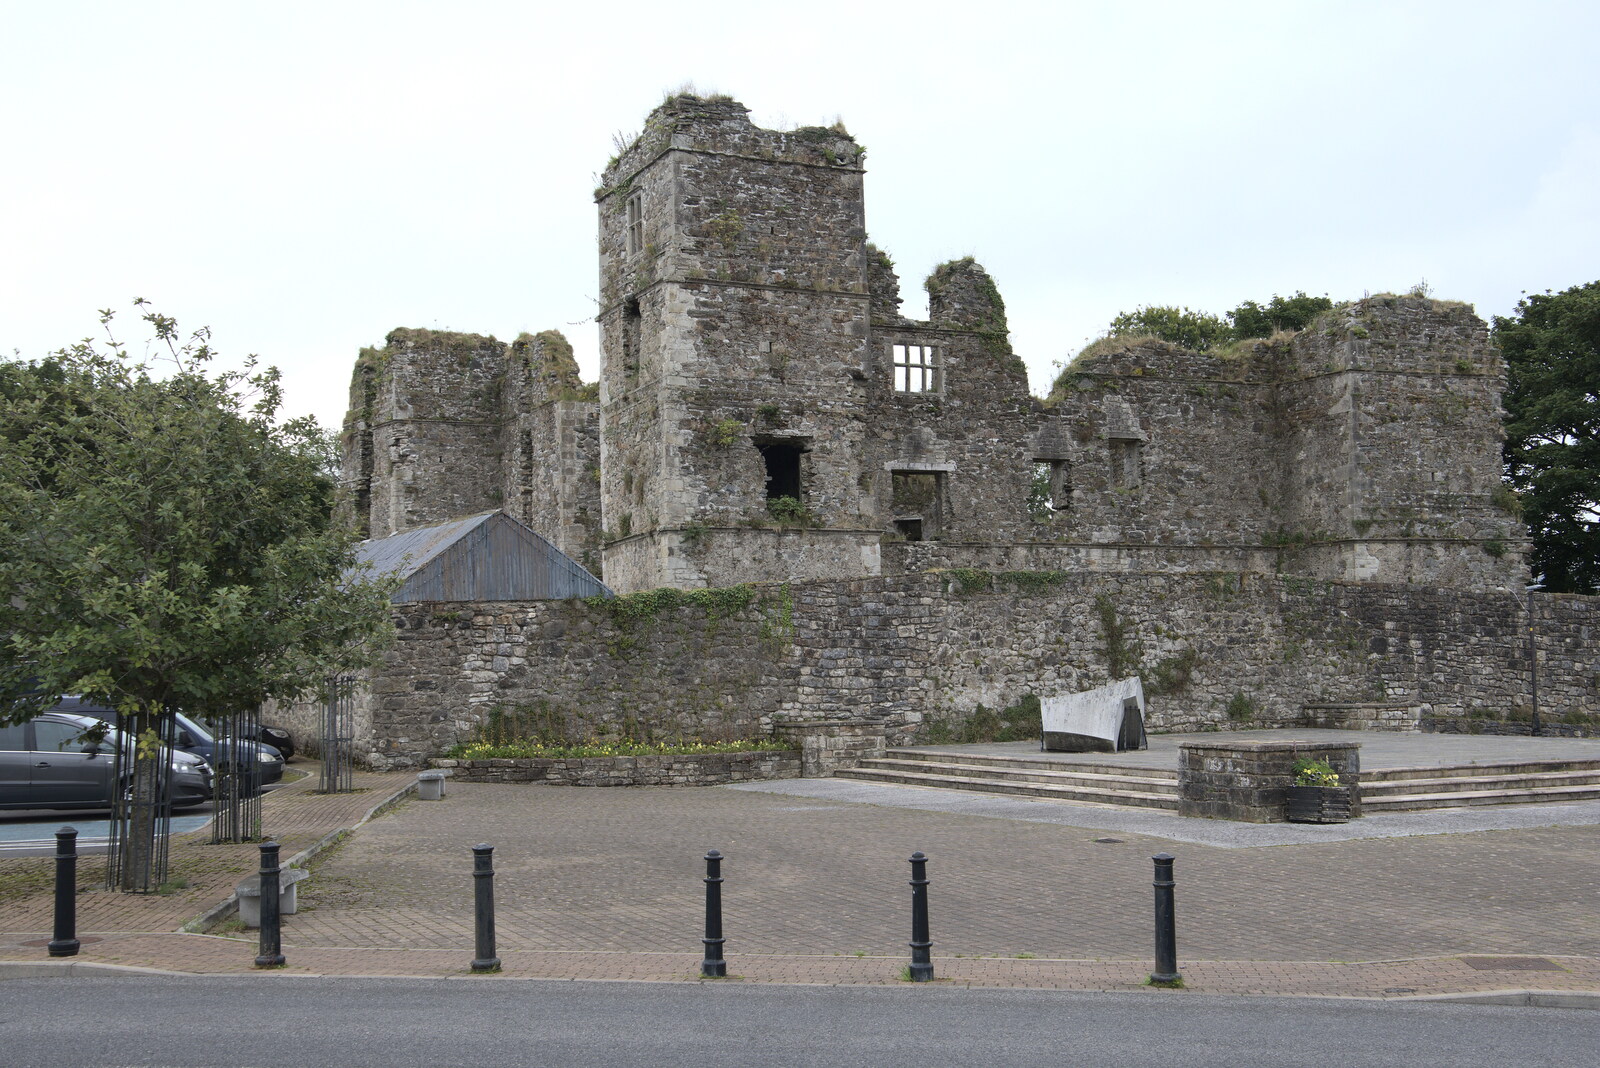 Manorhamilton castle from Manorhamilton and the Street Art of Dún Laoghaire, Ireland - 15th August 2021